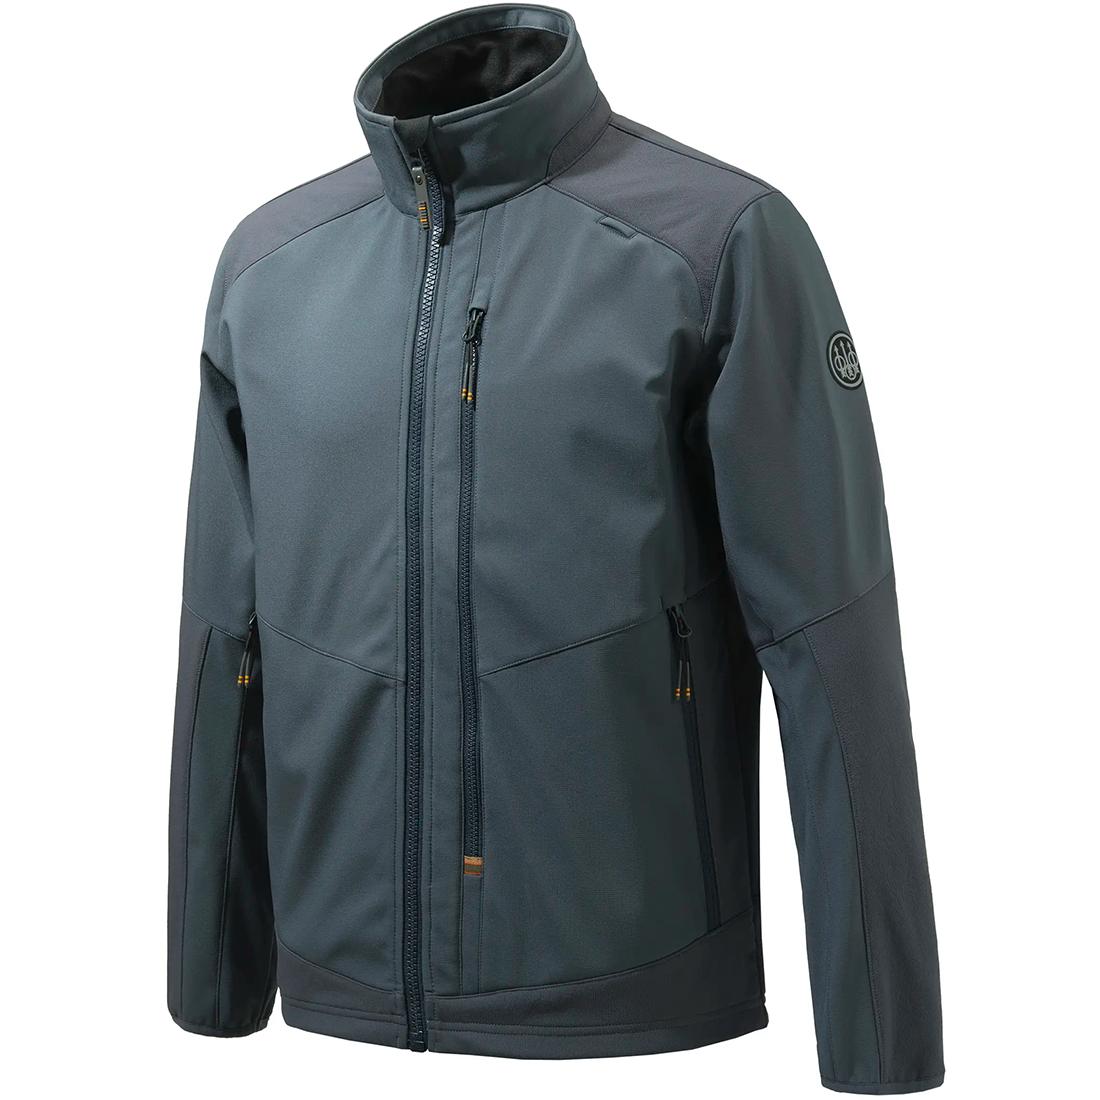  Butte Softshell Jacket